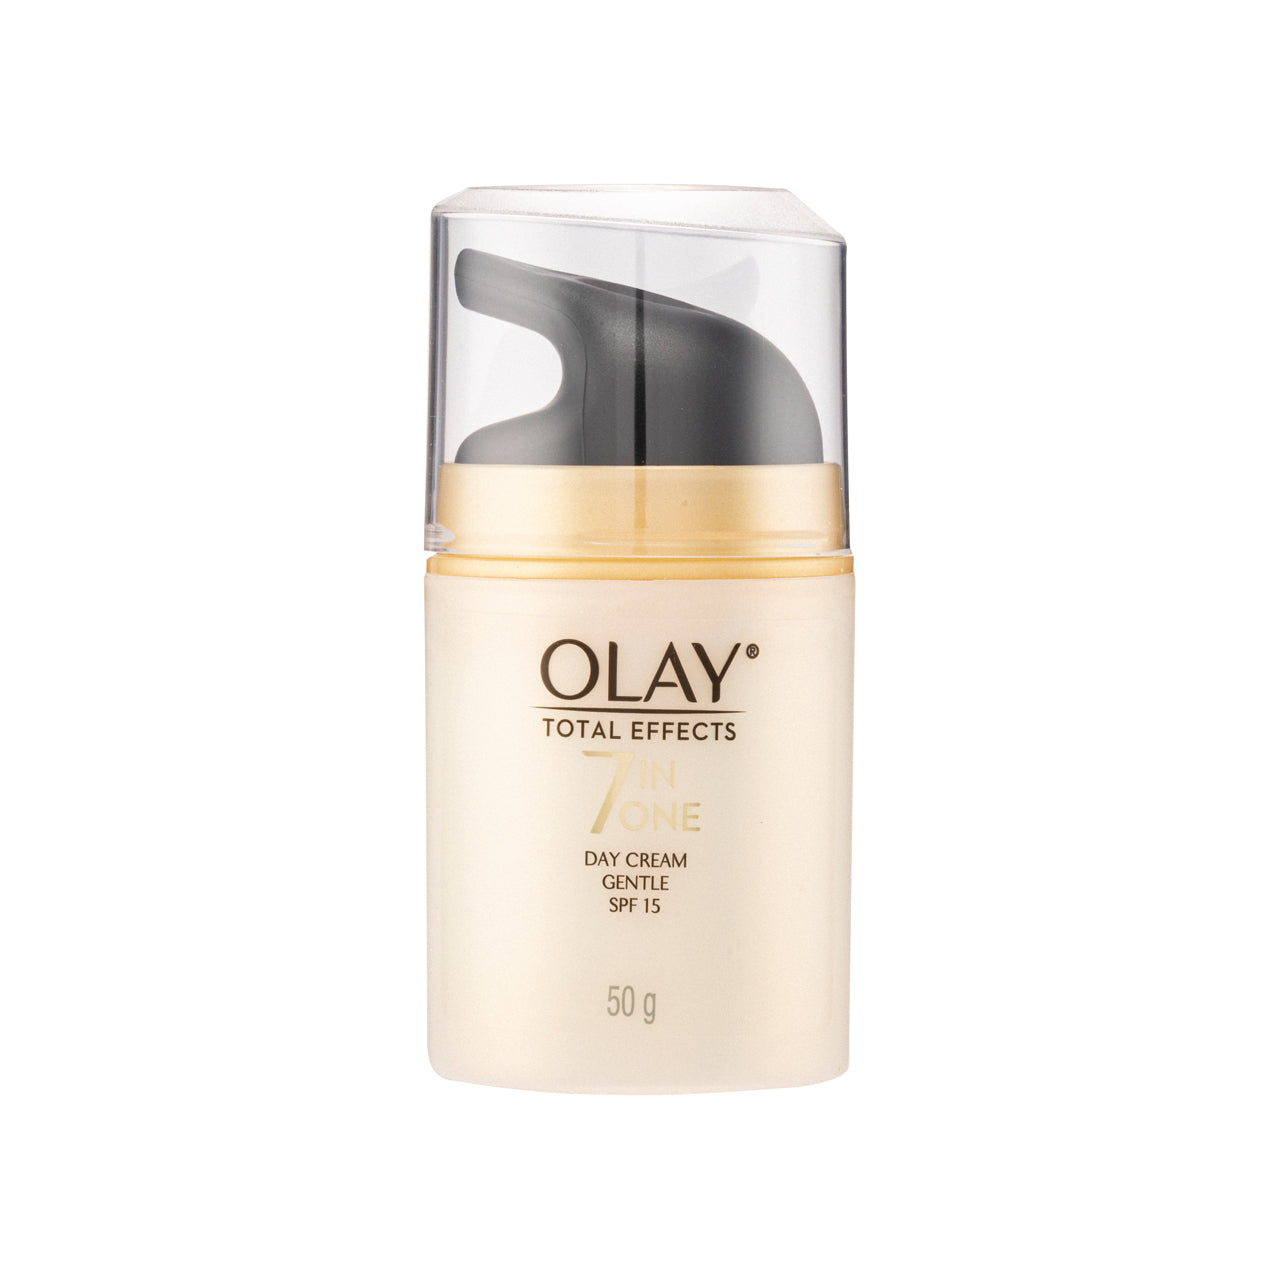 Olay Total Effects 7 In 1 Gentle Day Cream SPF15 50G | Sasa Global eShop